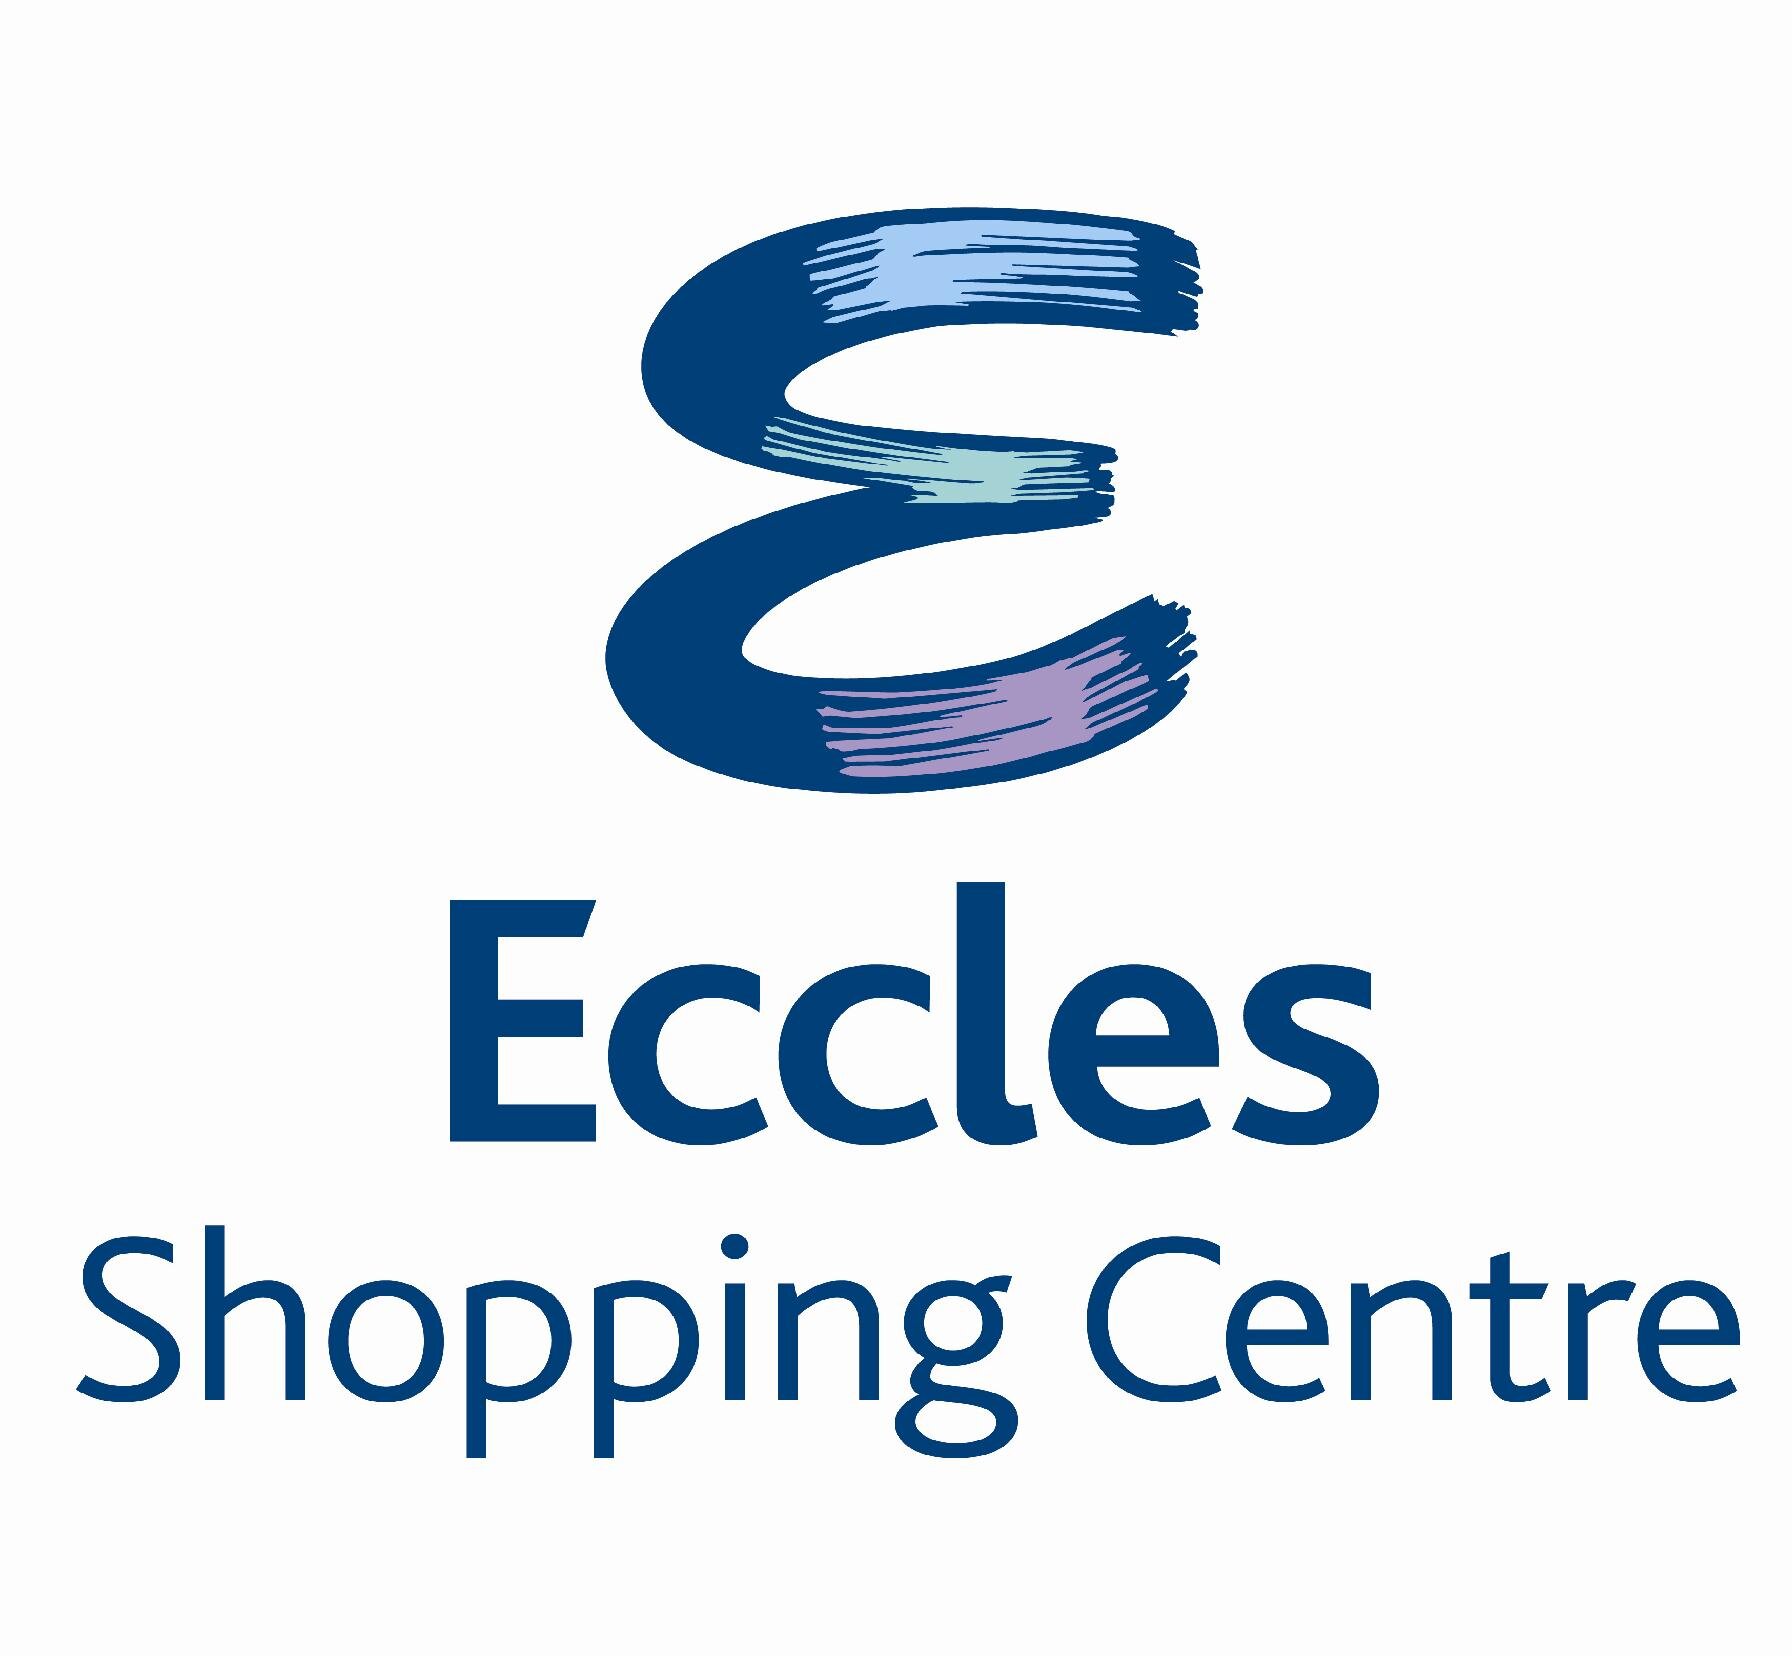 Shopping Centre located in the heart of Eccles. Everything you need all in one place...